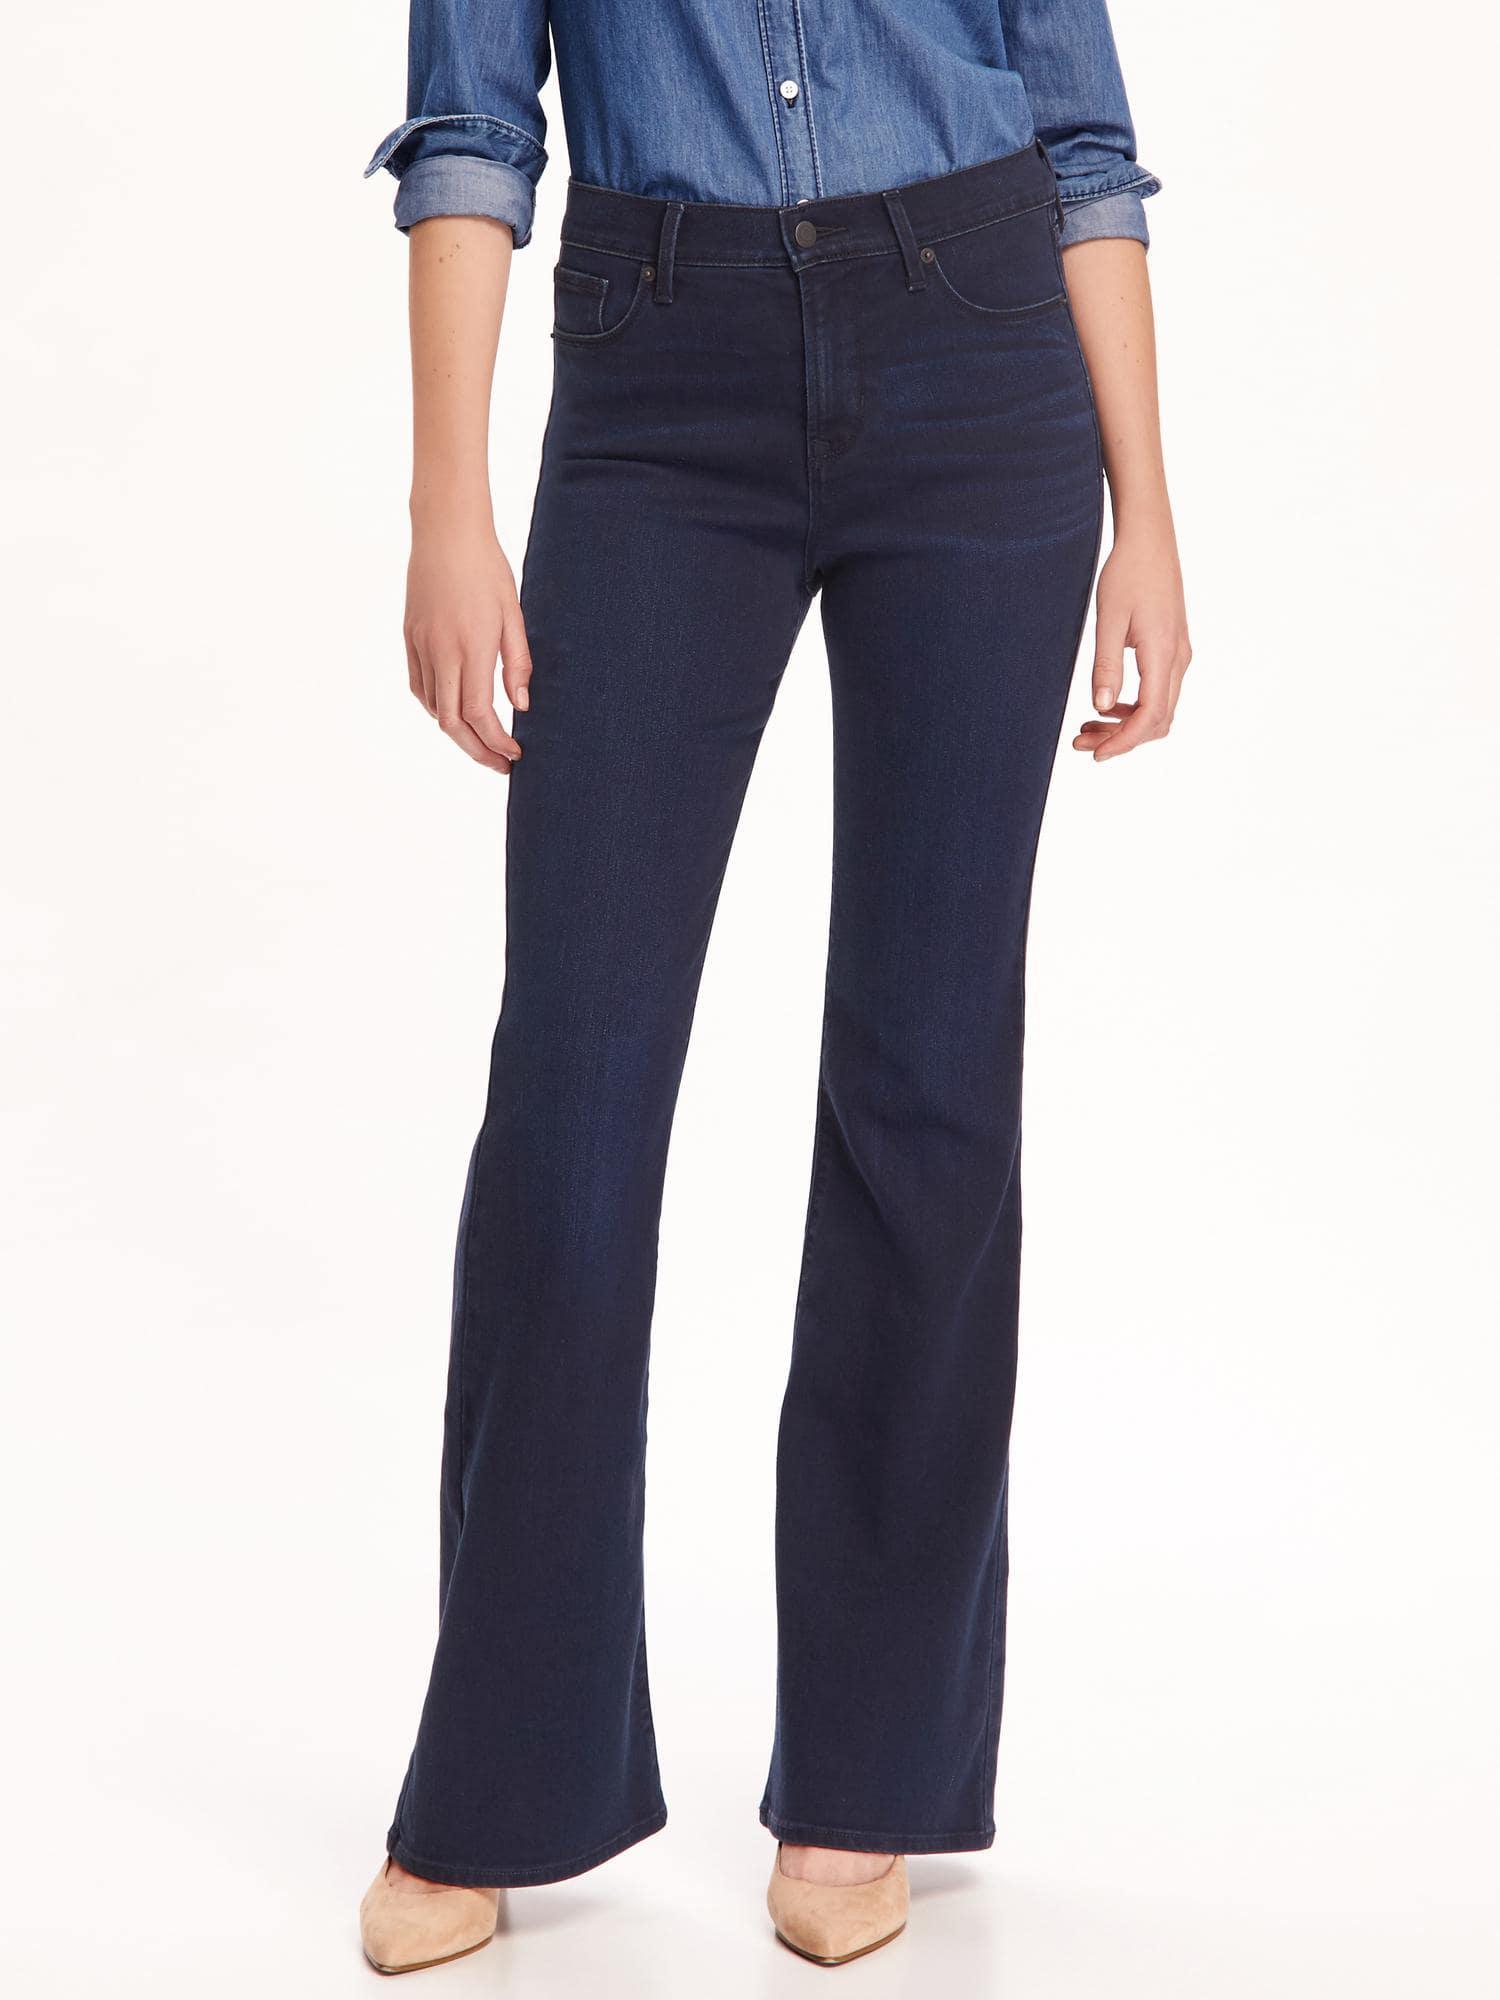 old navy high rise flare jeans